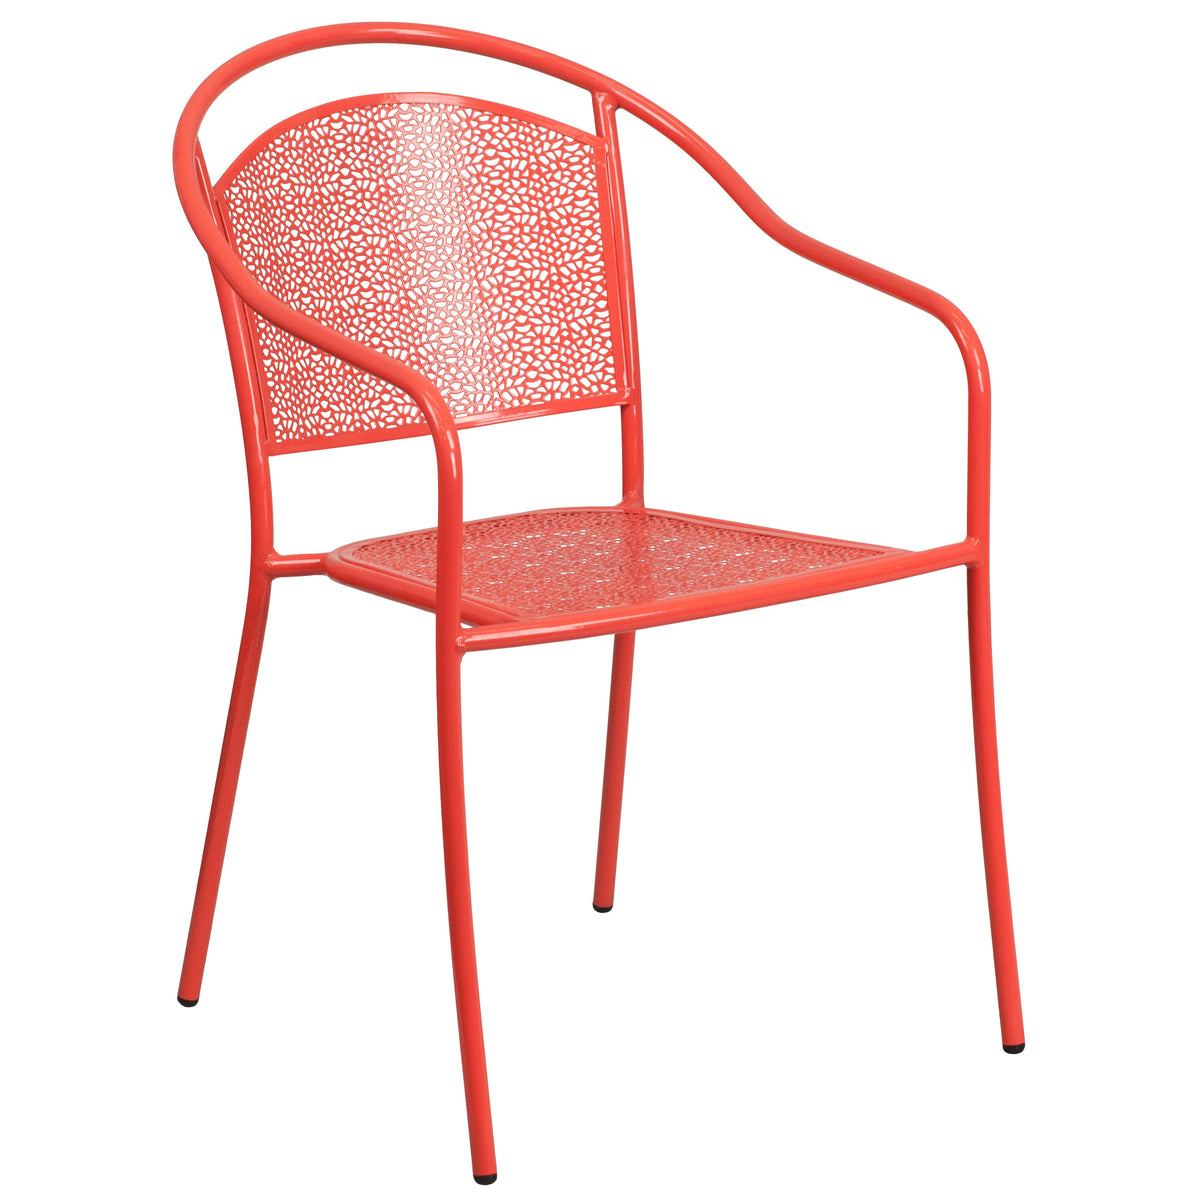 Coral |#| 30inch Round Coral Indoor-Outdoor Steel Folding Patio Table Set with 4 Chairs